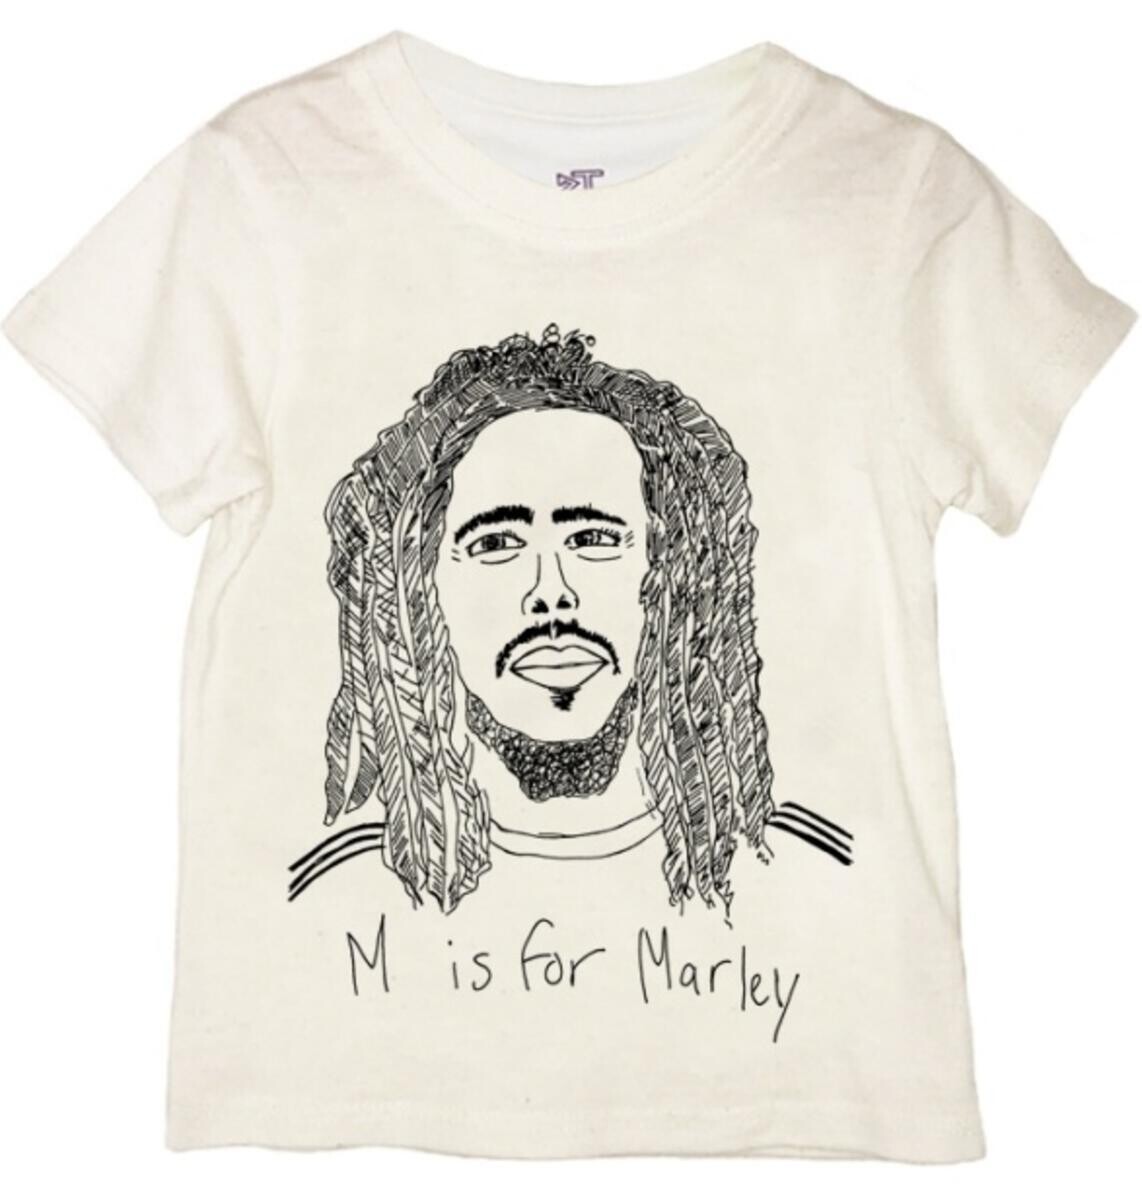 M is for Marley Tee